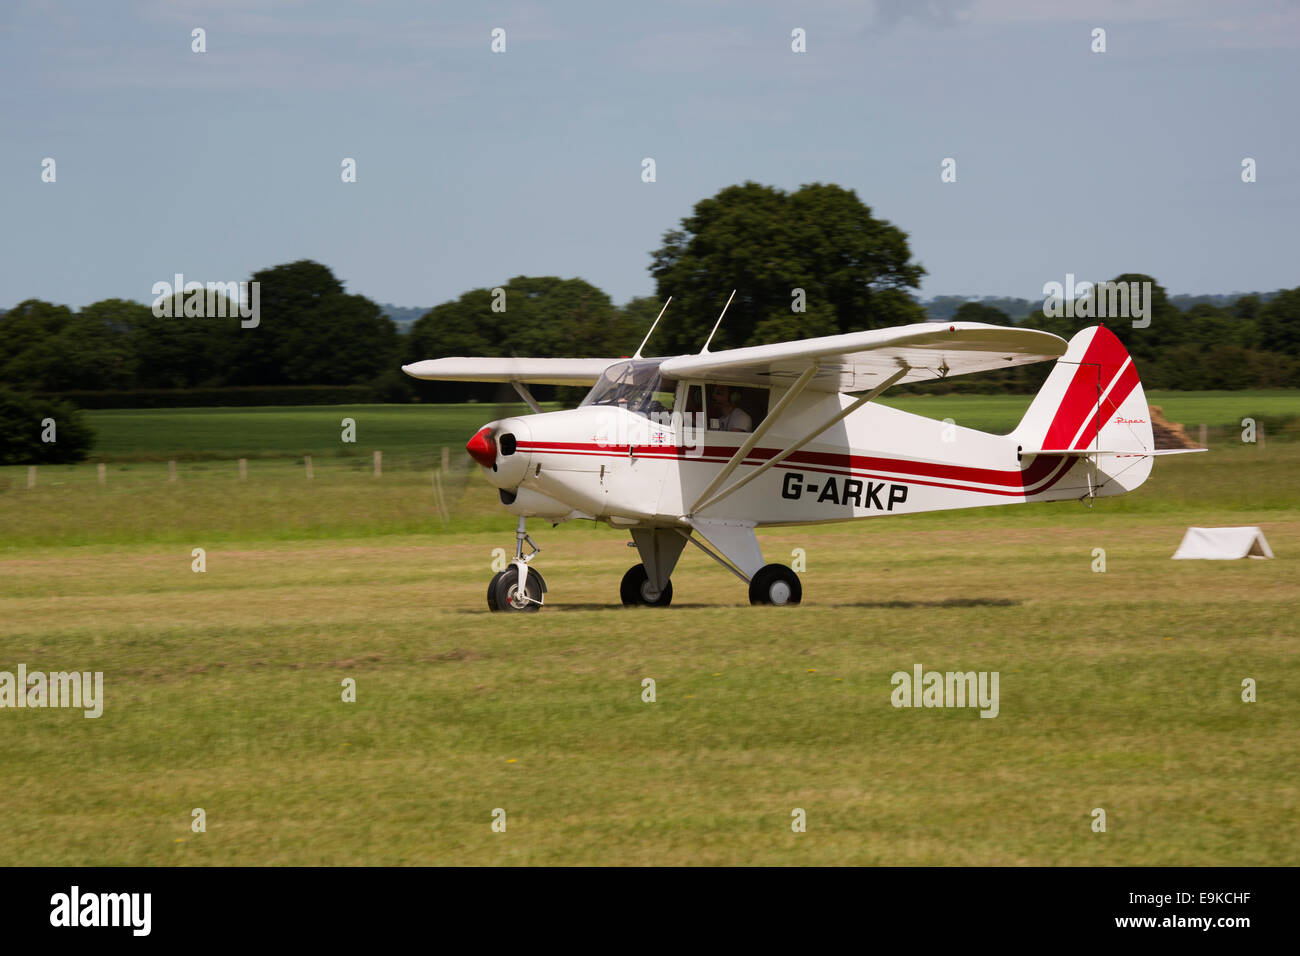 Piper PA-22-160 Colt G-ARKP taking off from grass runway at Headcorn Airfield Stock Photo